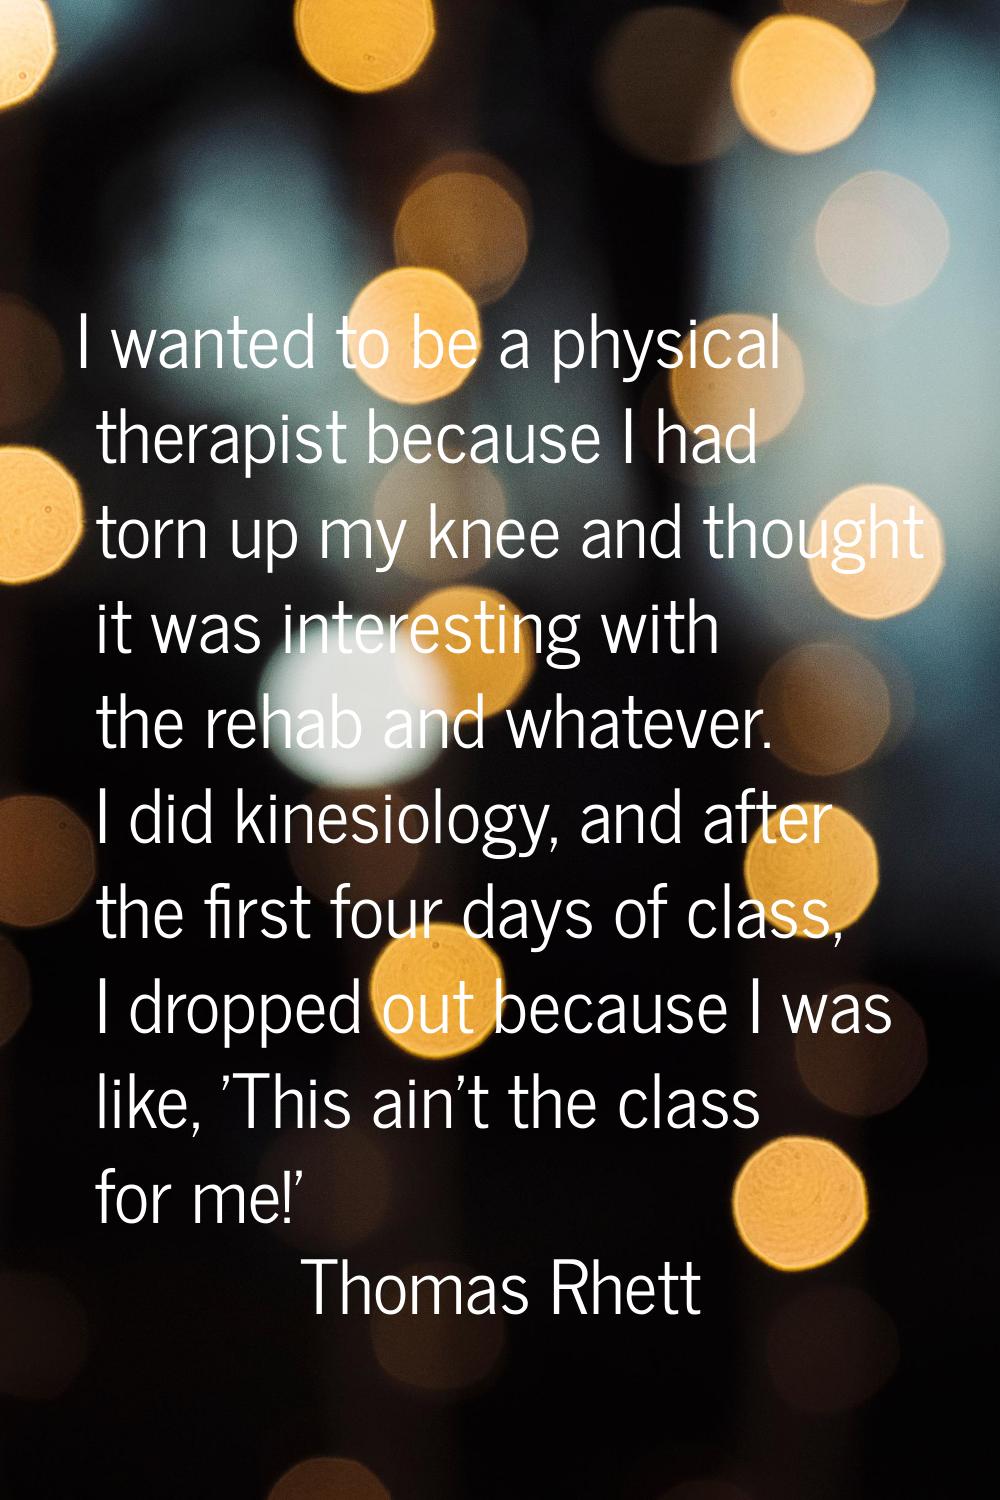 I wanted to be a physical therapist because I had torn up my knee and thought it was interesting wi